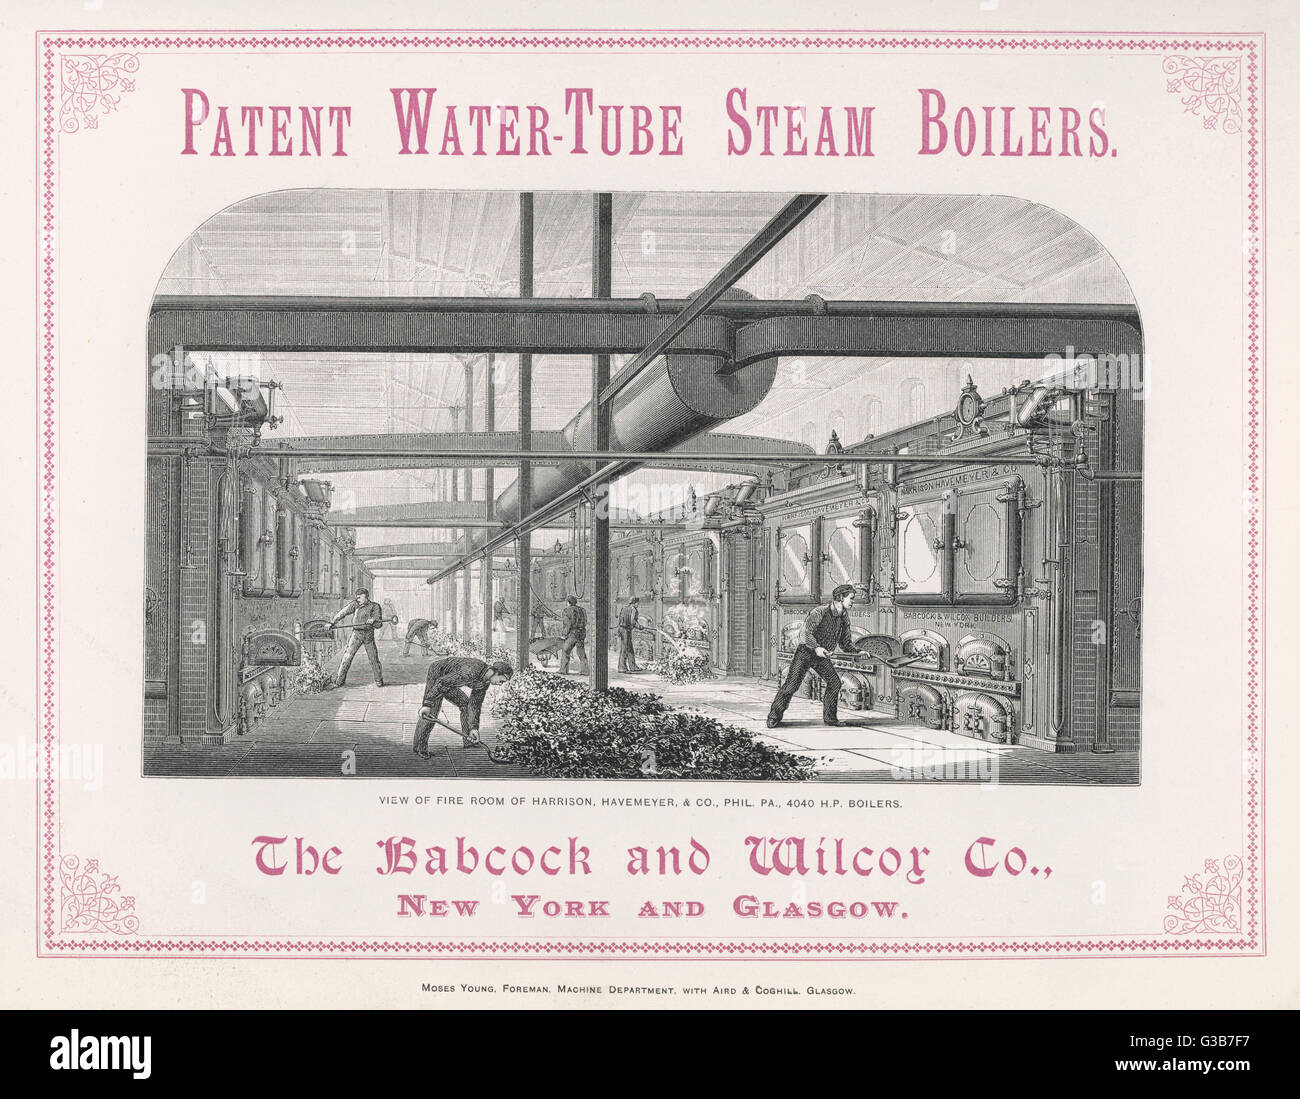 STEAM BOILERS/1885 AD Stock Photo